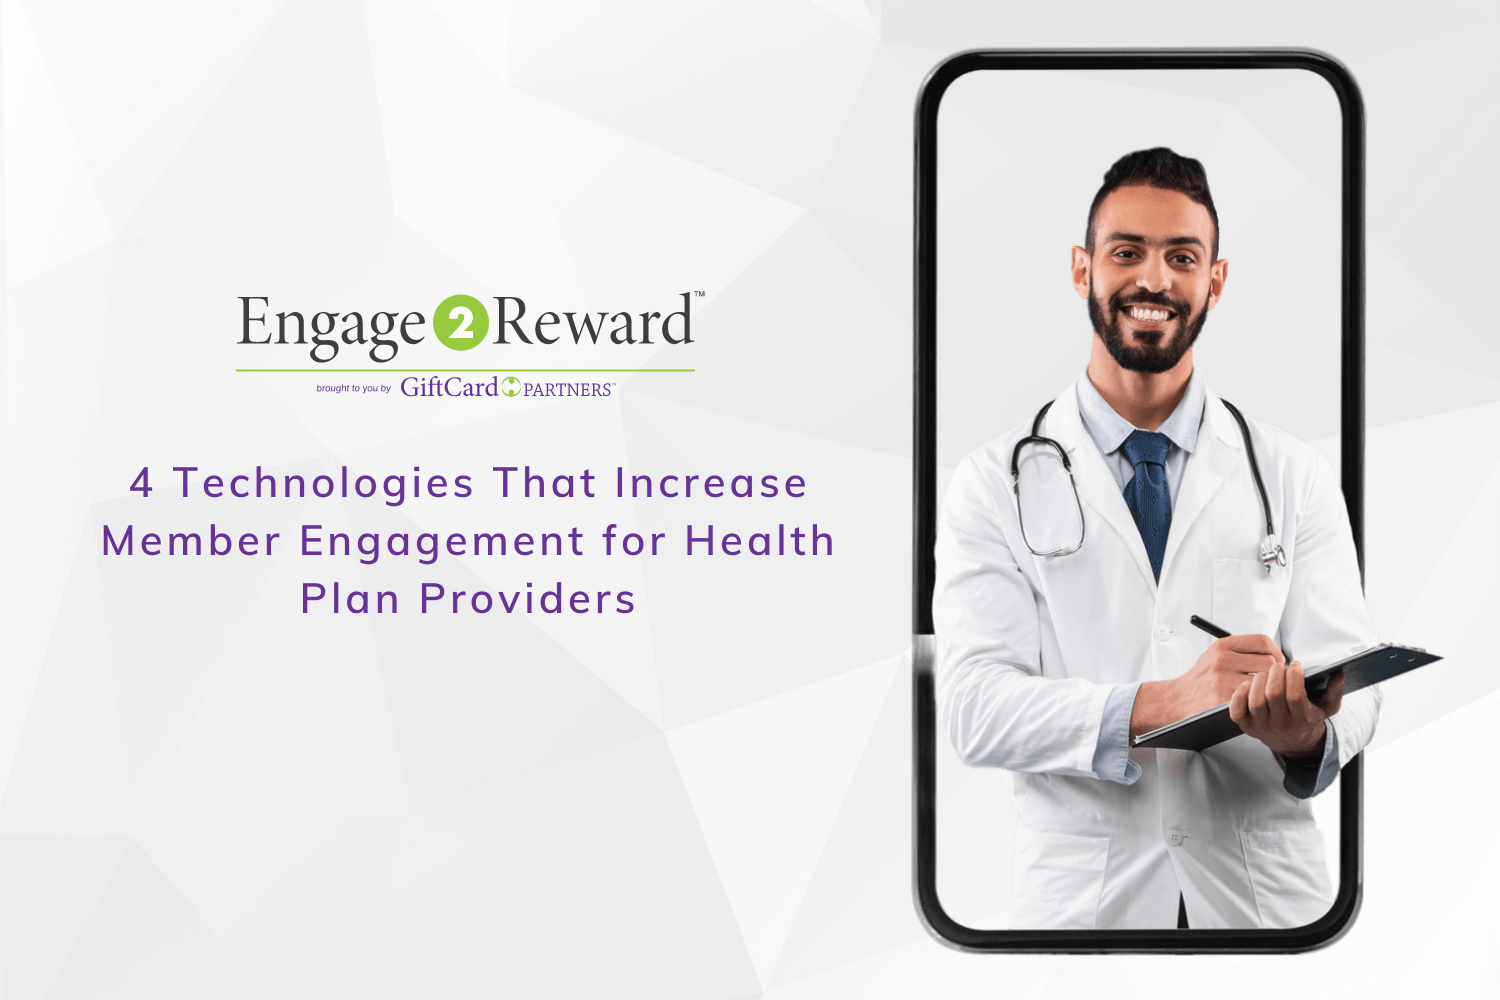 4 Technologies That Increase Member Engagement for Health Plan Providers